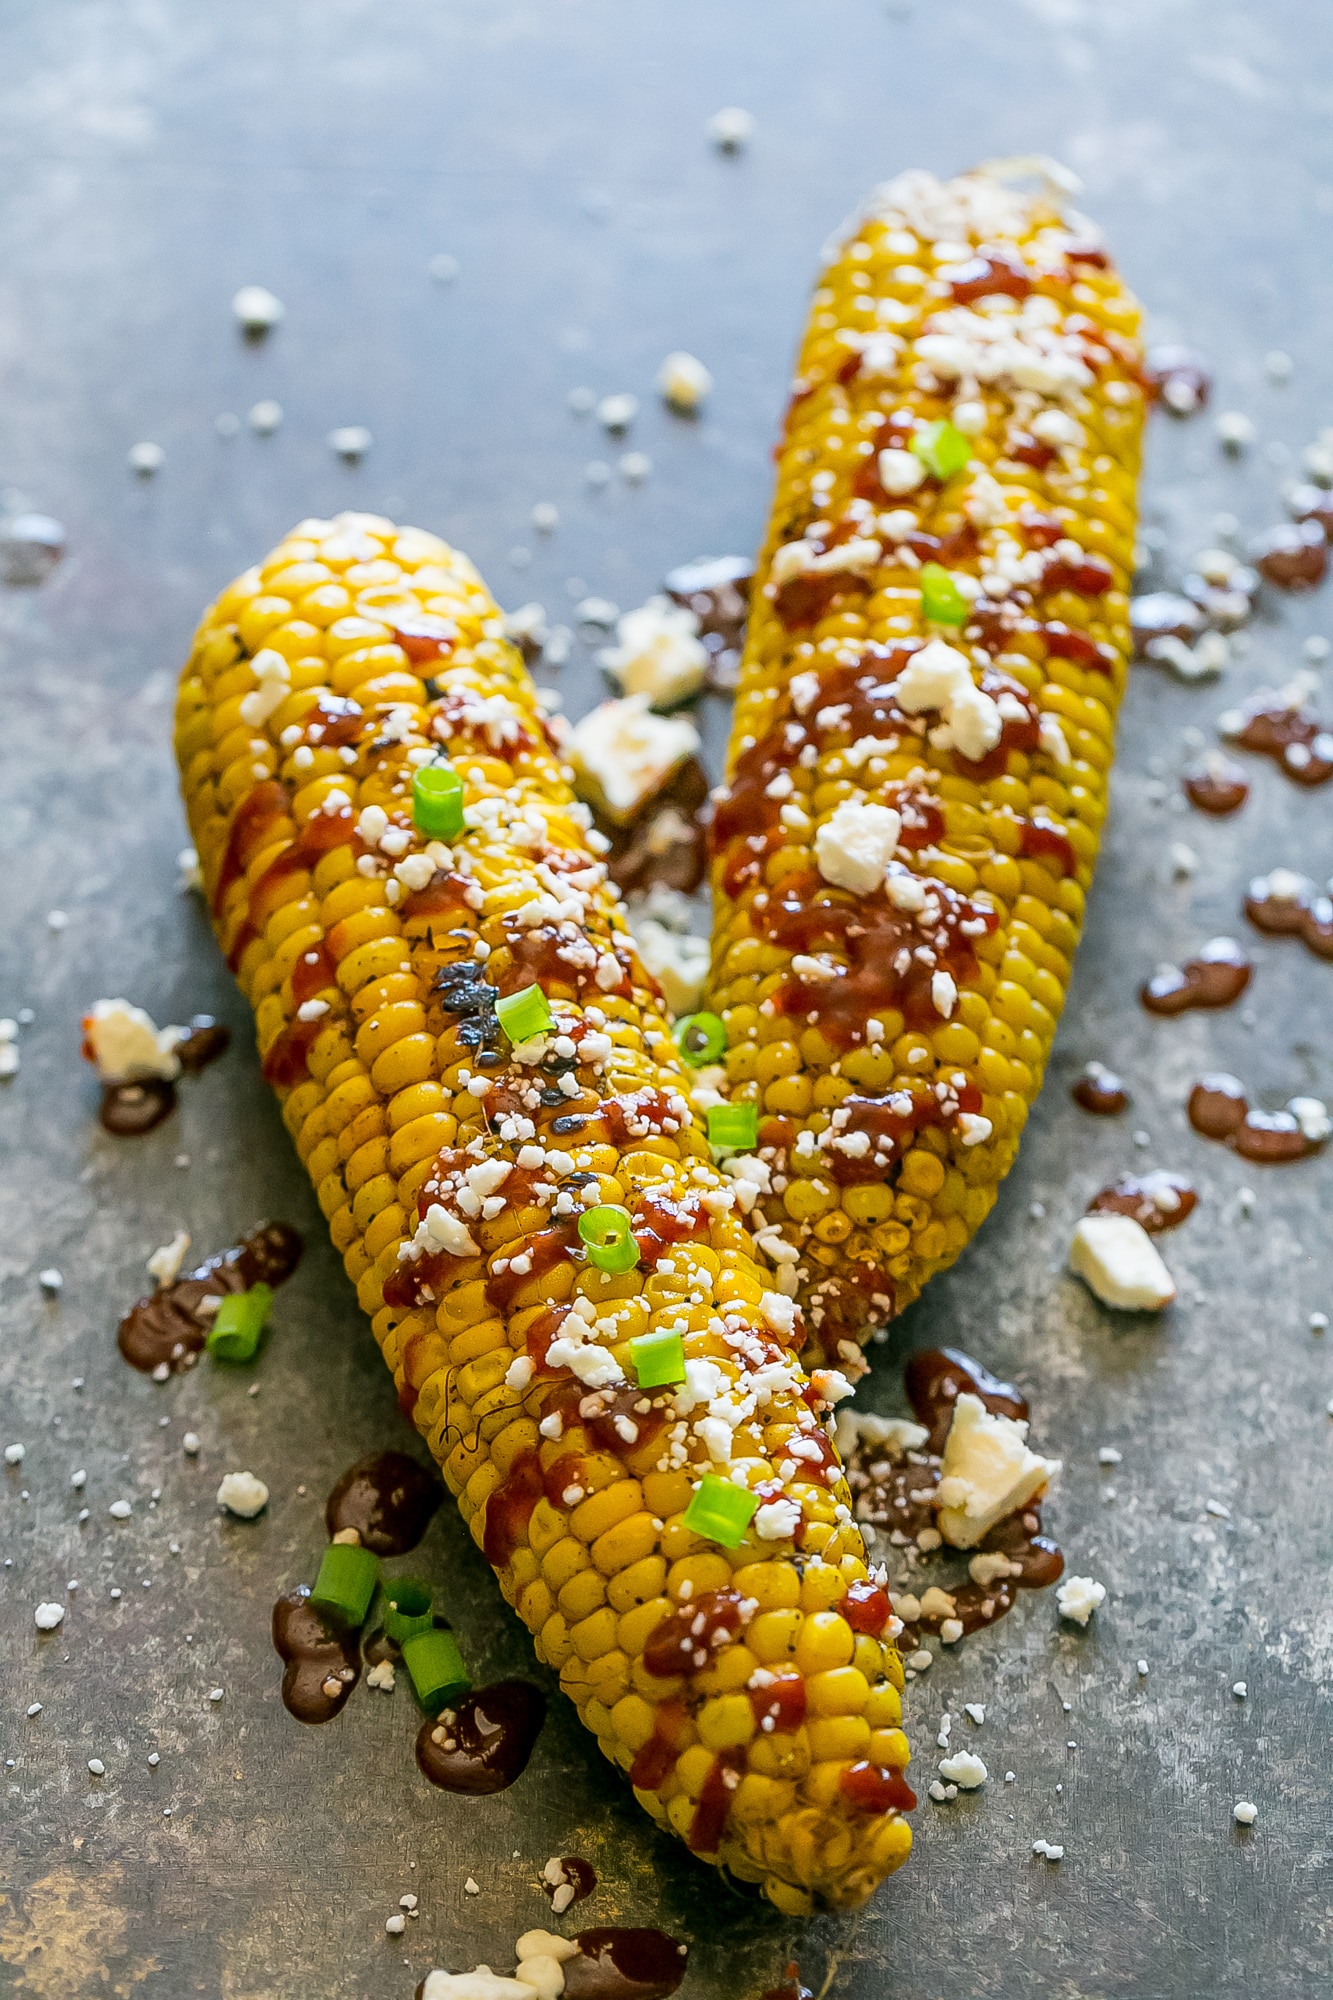 spicy, salty and so delicious - this is our favorite street corn recipe with sriracha and cheese! 